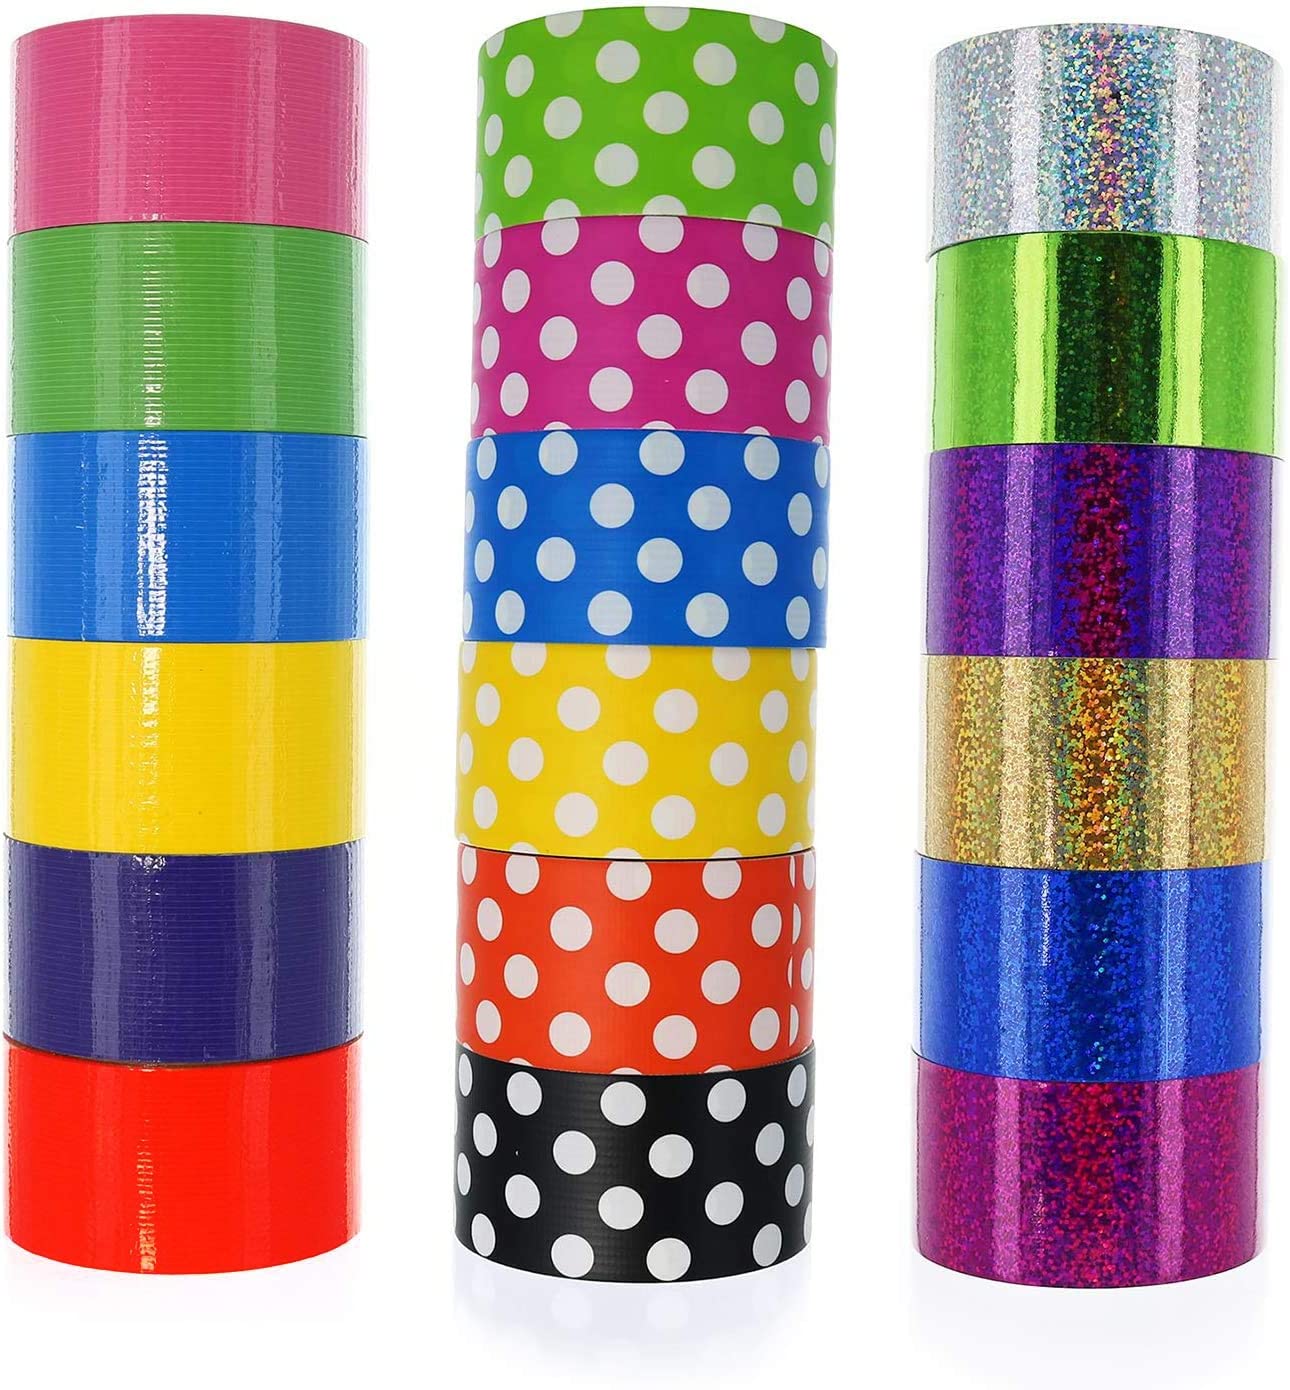 GIFTEXPRESS 18pcs Assorted Colored Duct Tapes